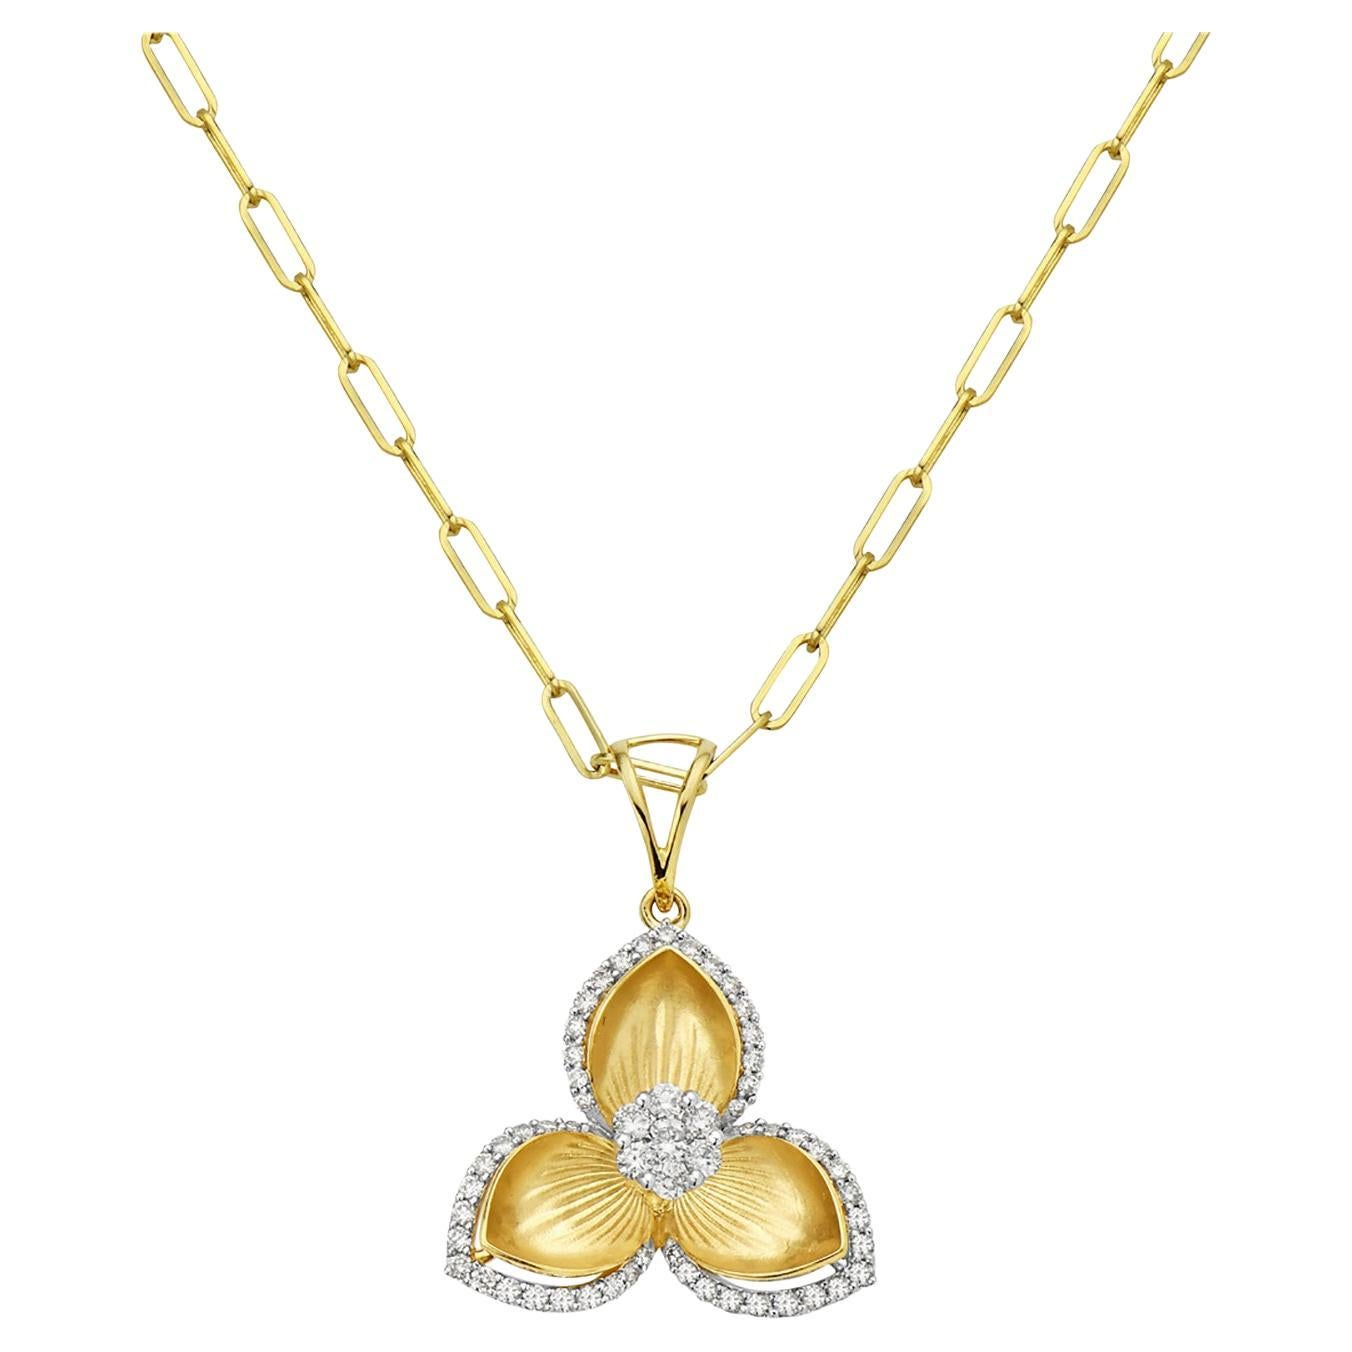 Flower Shaped Pendant with Carved Petals Equipped with Halo Diamonds in 14k Gold